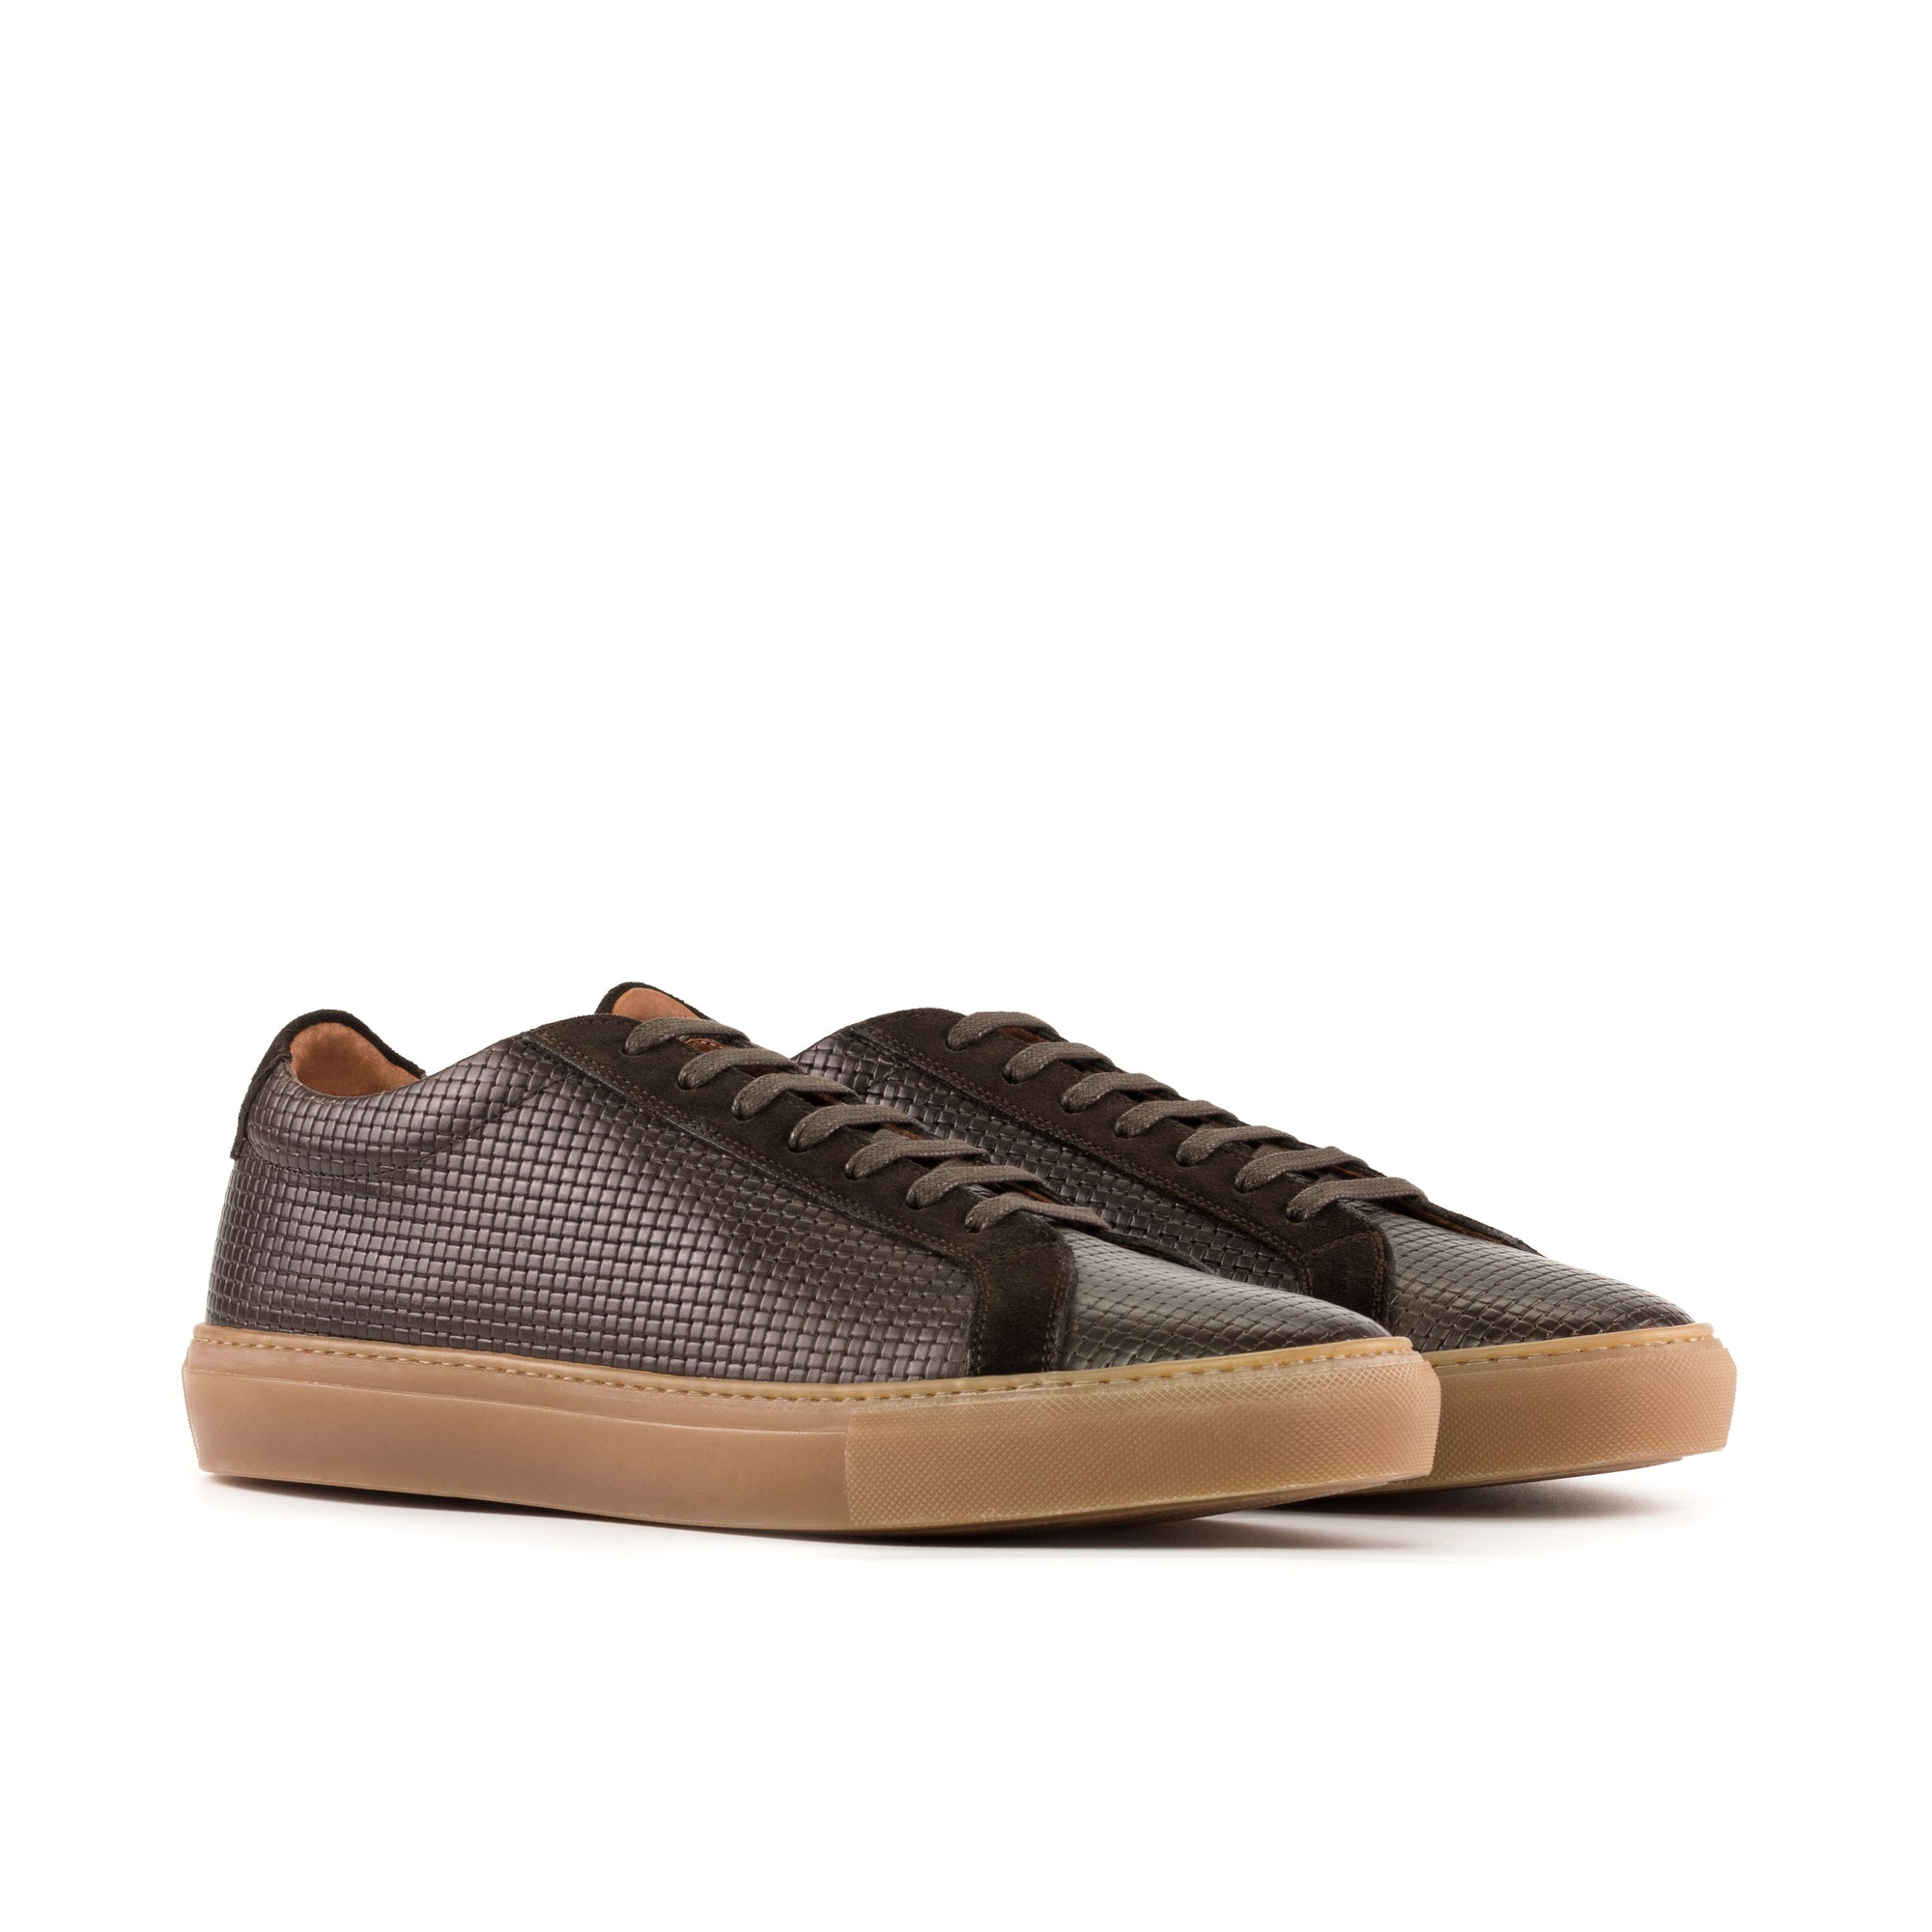 Brown Woven Leather Caramel Cupsole Sneaker